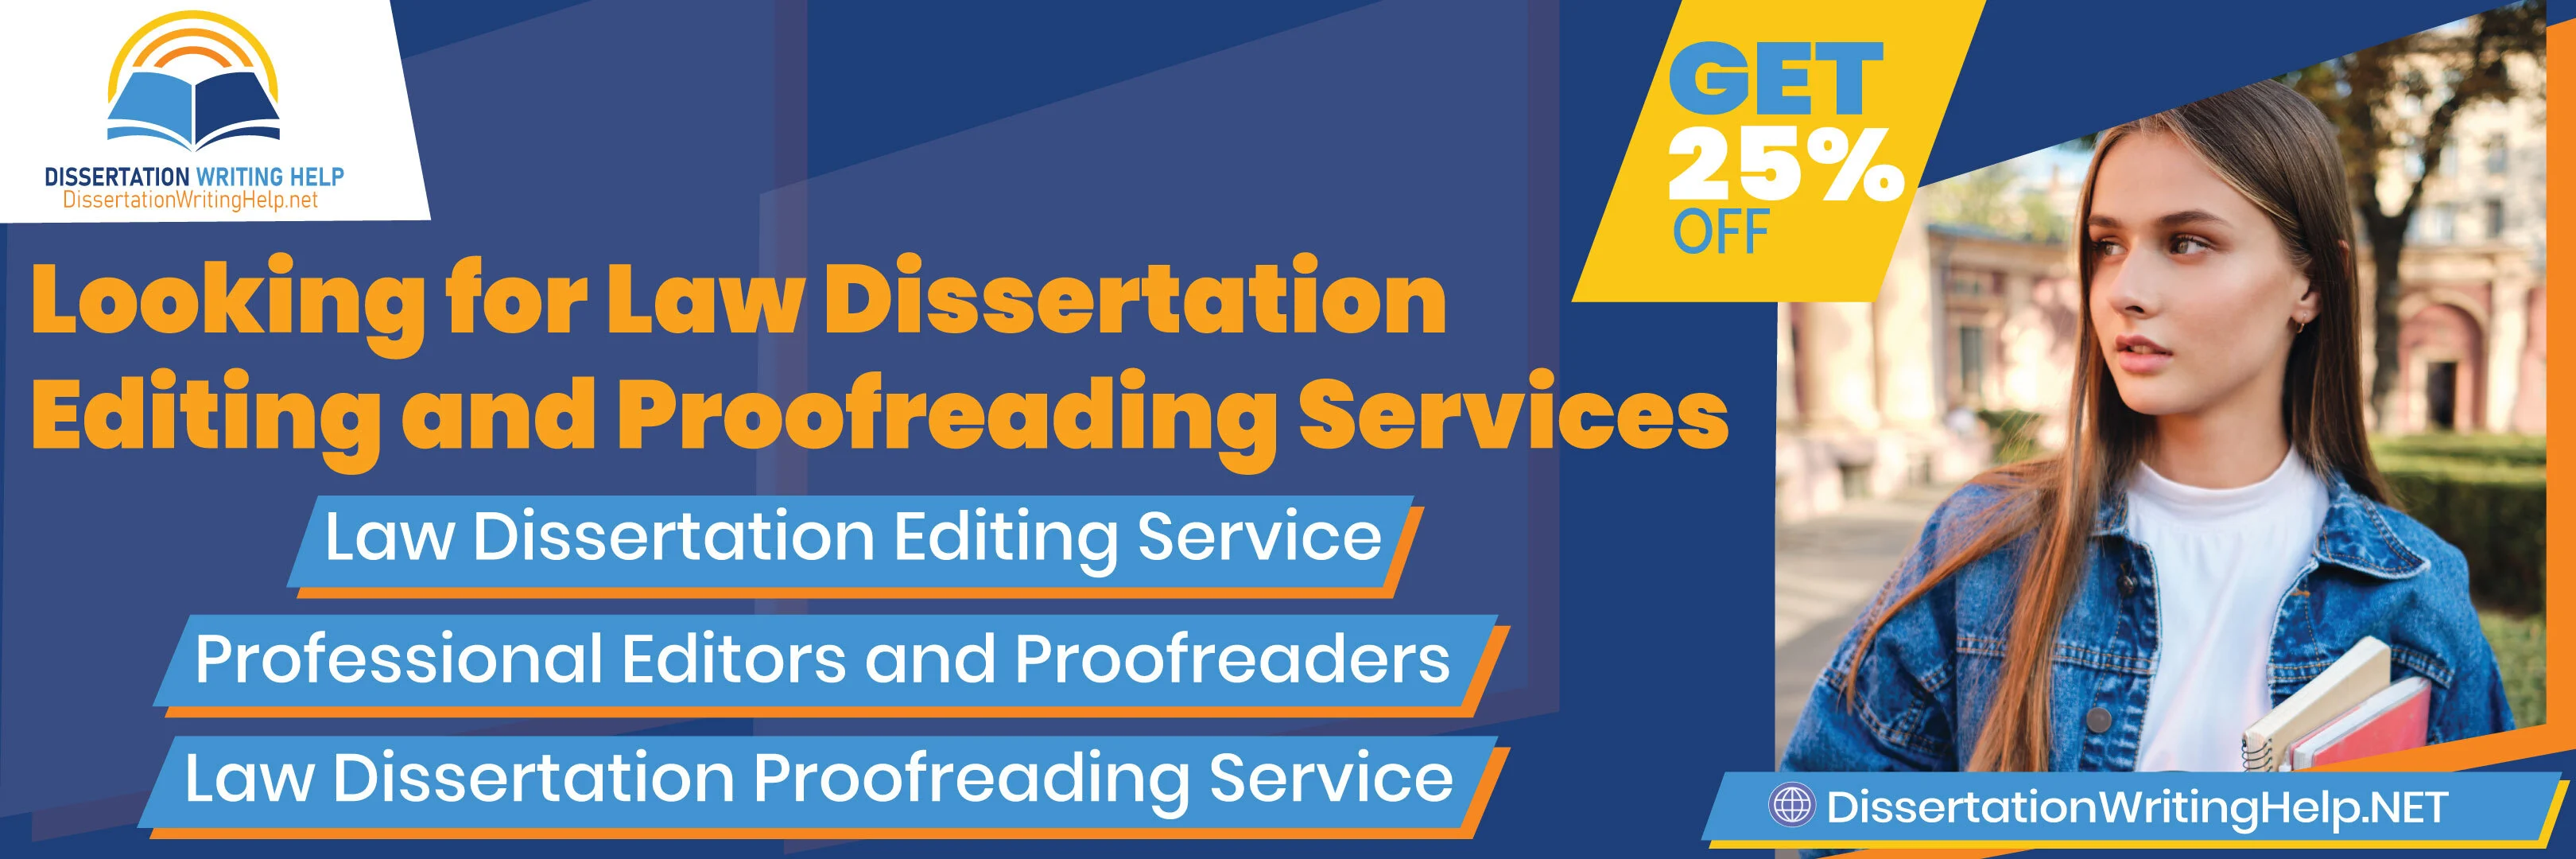 law-dissertation-editing-and-proofreading-services